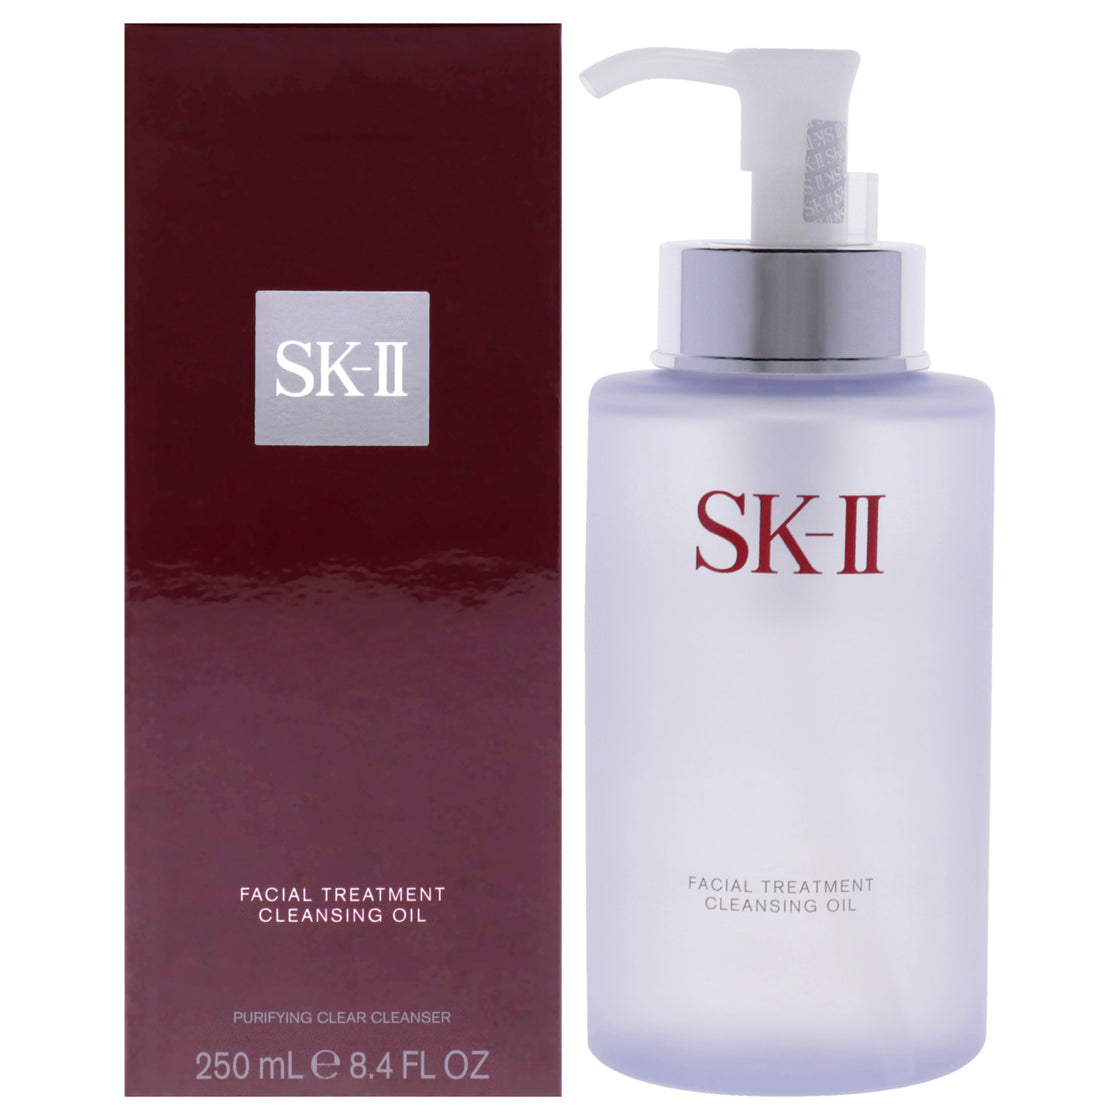 Facial Treatment Cleansing Oil by SK-II for Unisex - 8.4 oz Cleanser